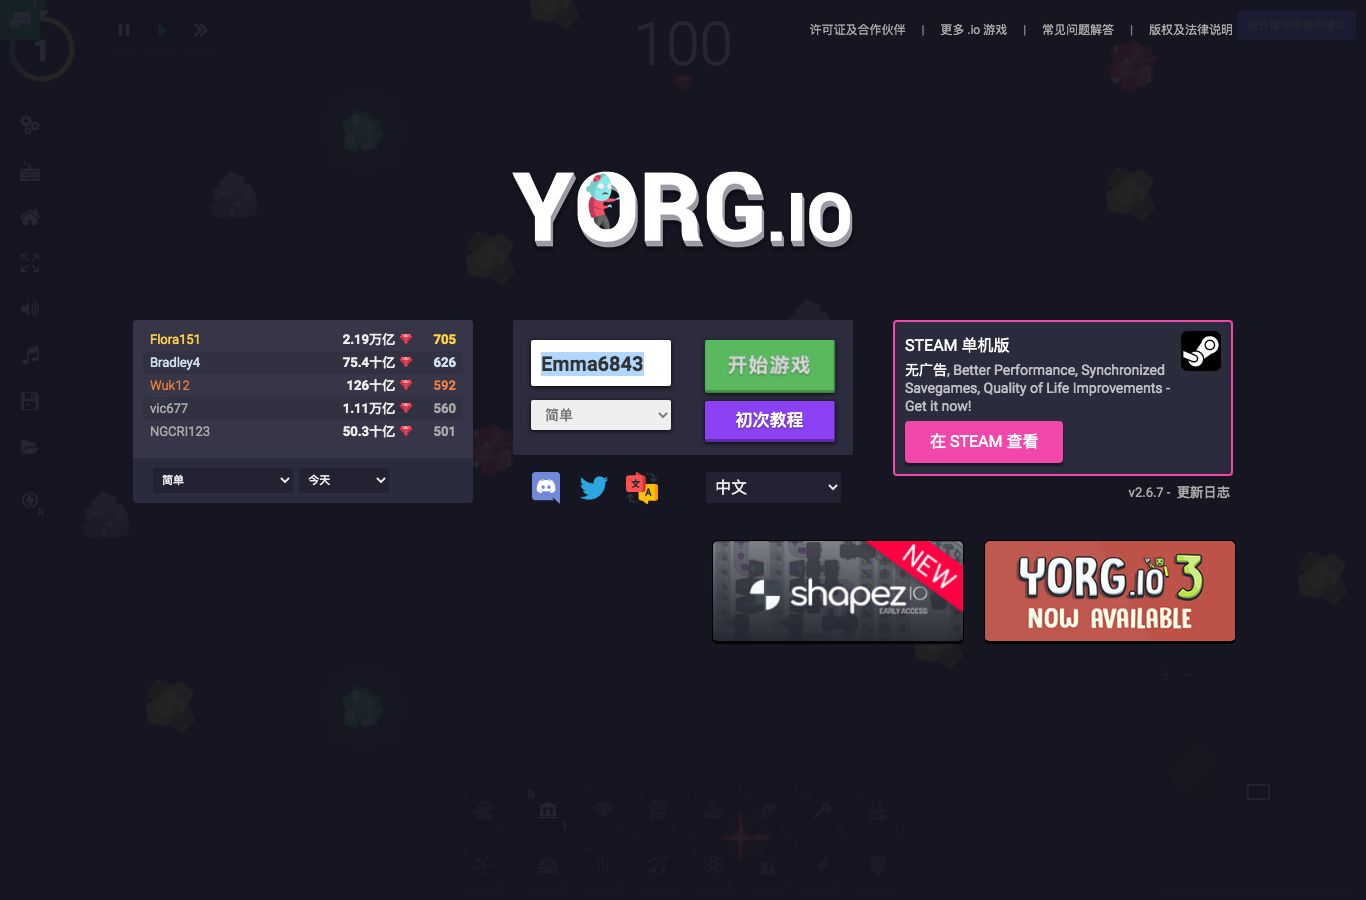 YORG.io Game - Tower Defense, Upgrades and Zombies!